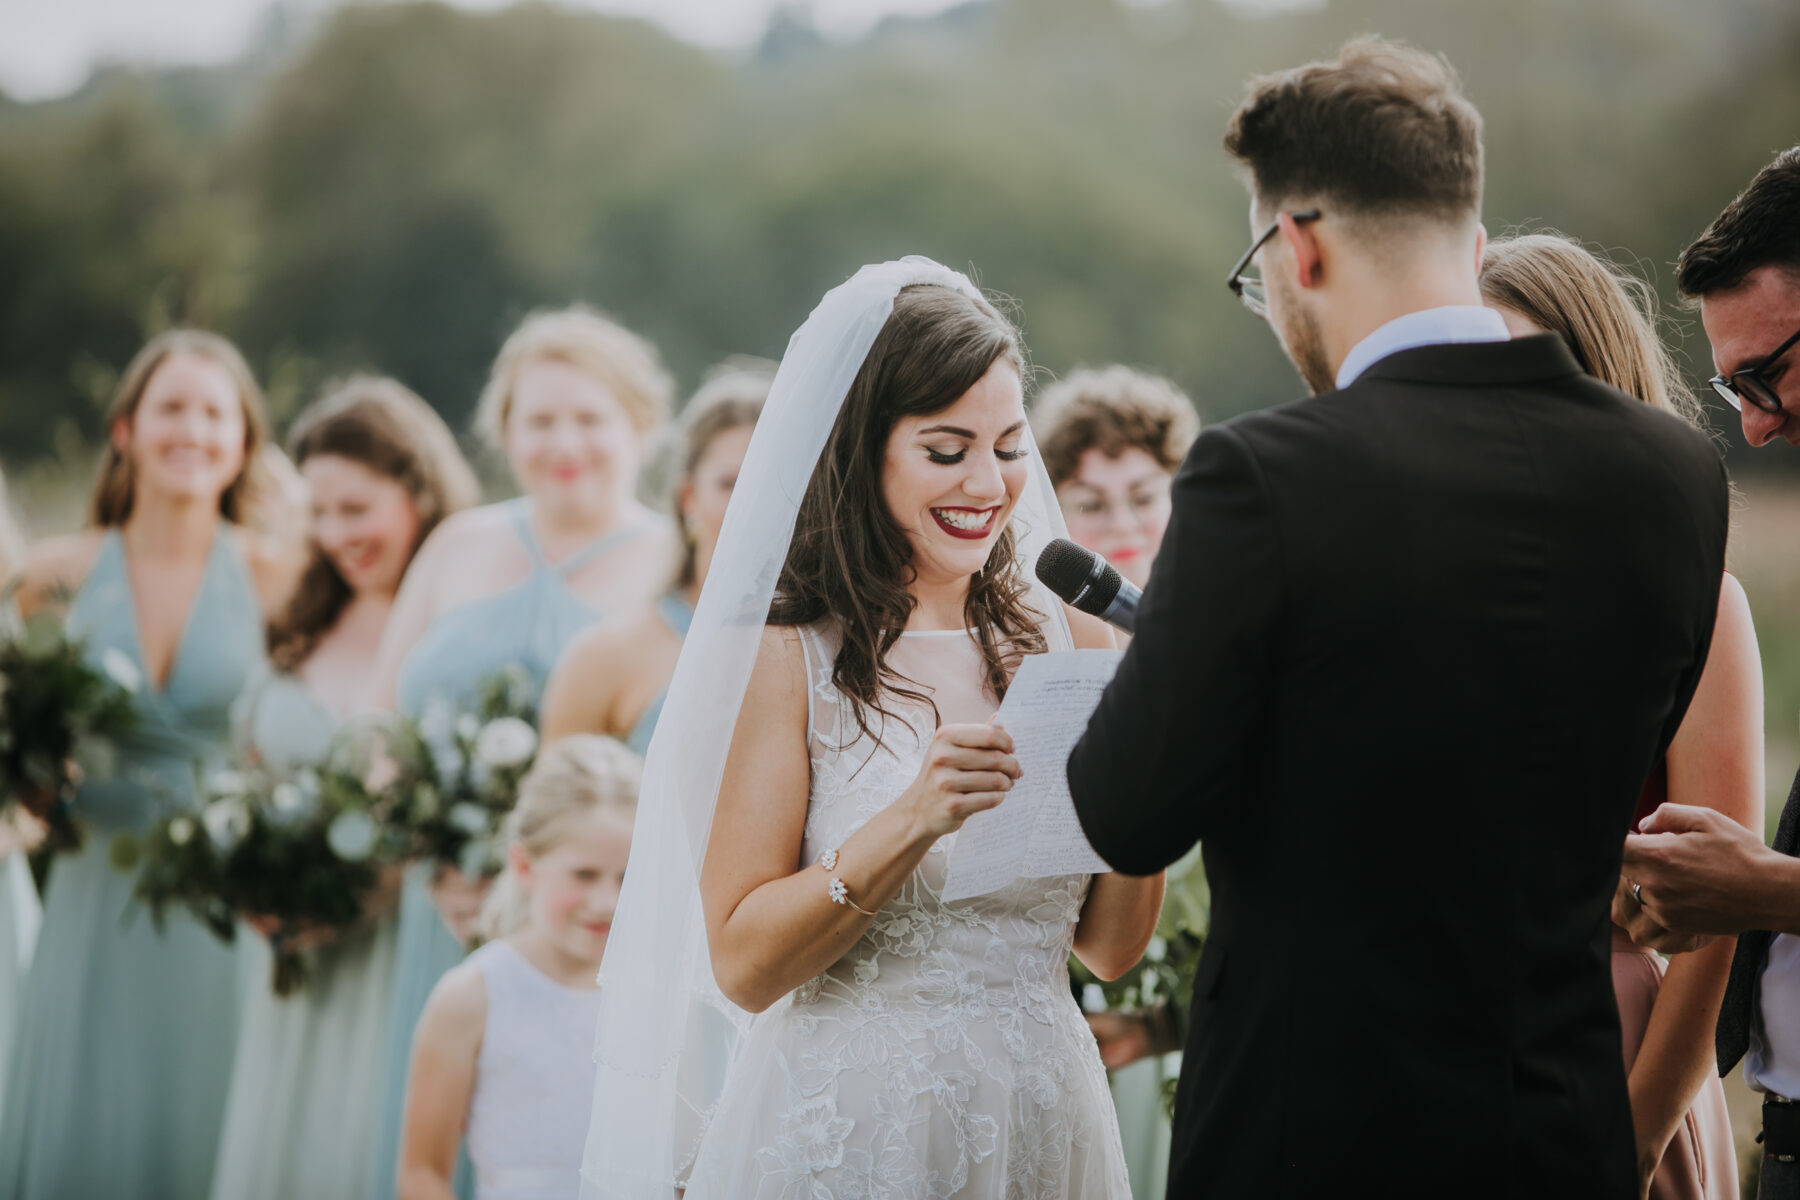 Wedding vows: Nashville Wedding with Beautiful Views by Teale Photography featured on Nashville Bride Guide